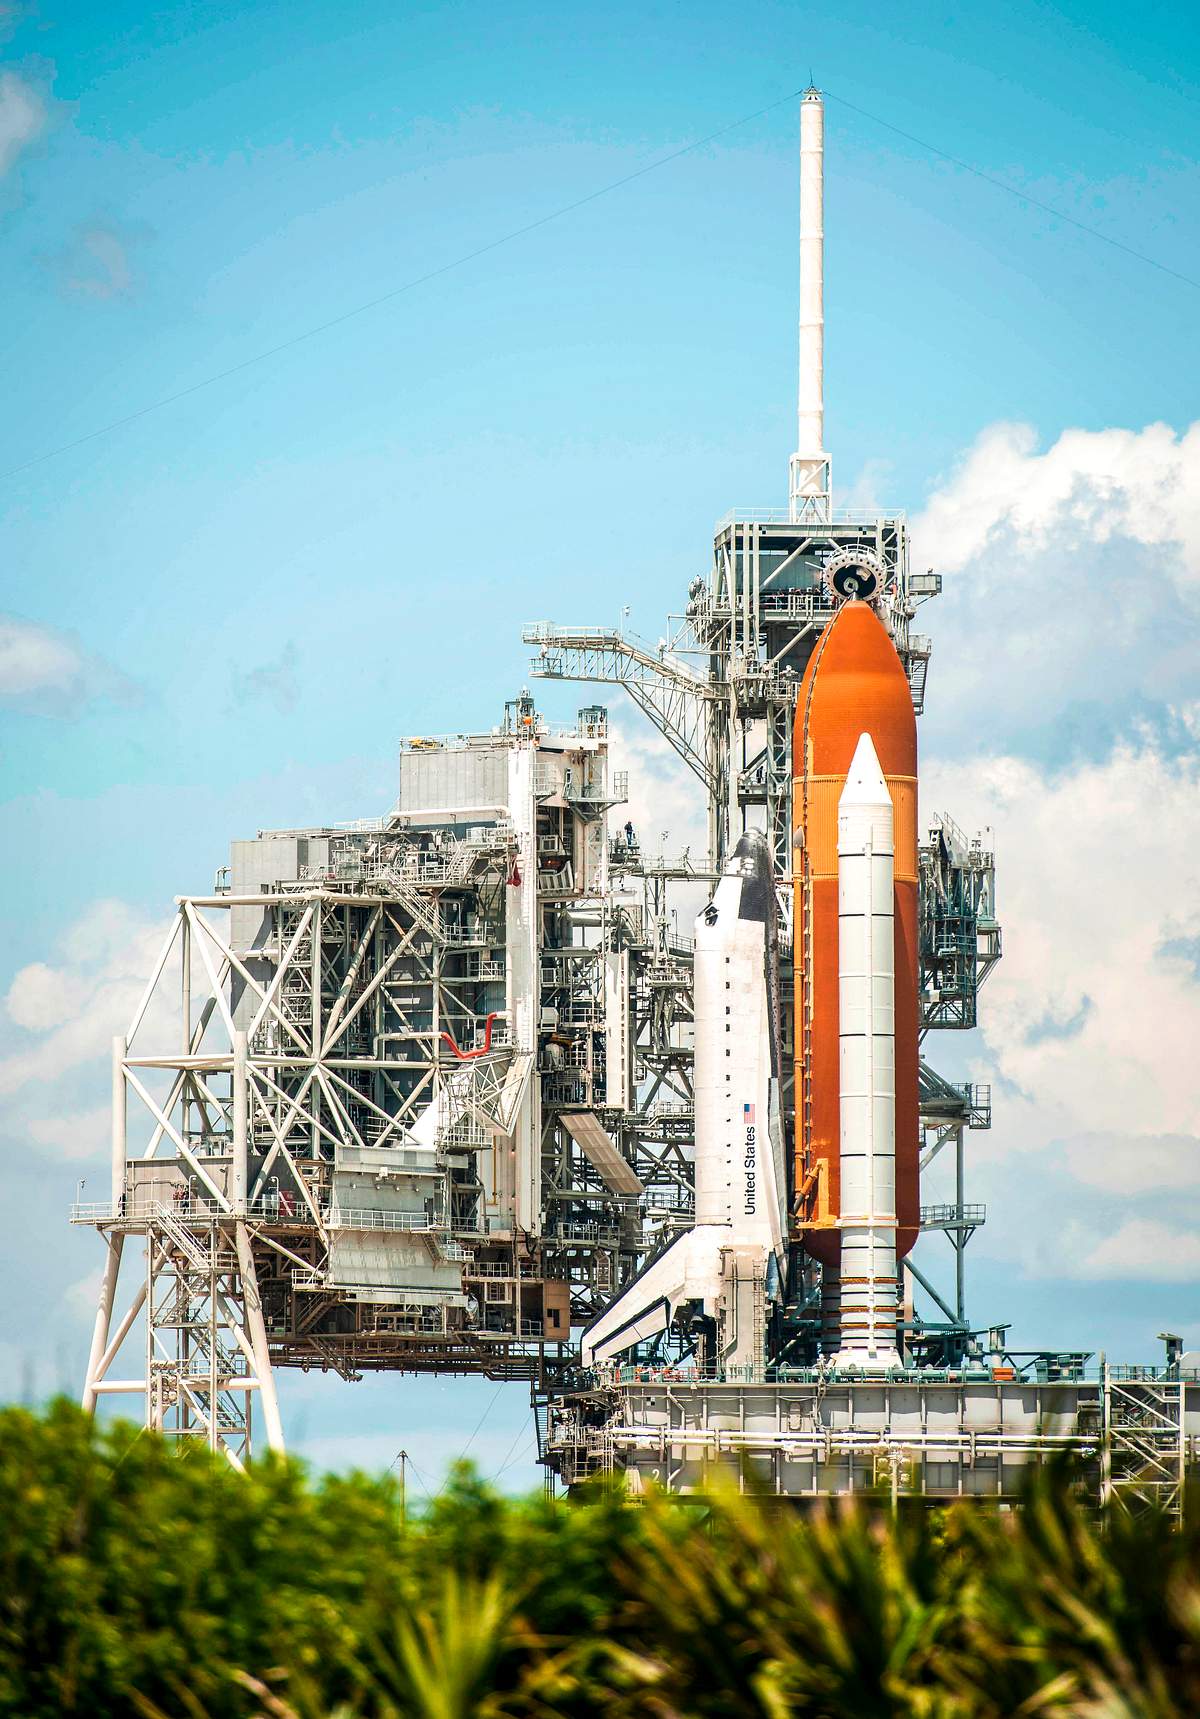 Space Shuttle Endeavour Glistens In The Sun On Launch Pad 39a At Nasa